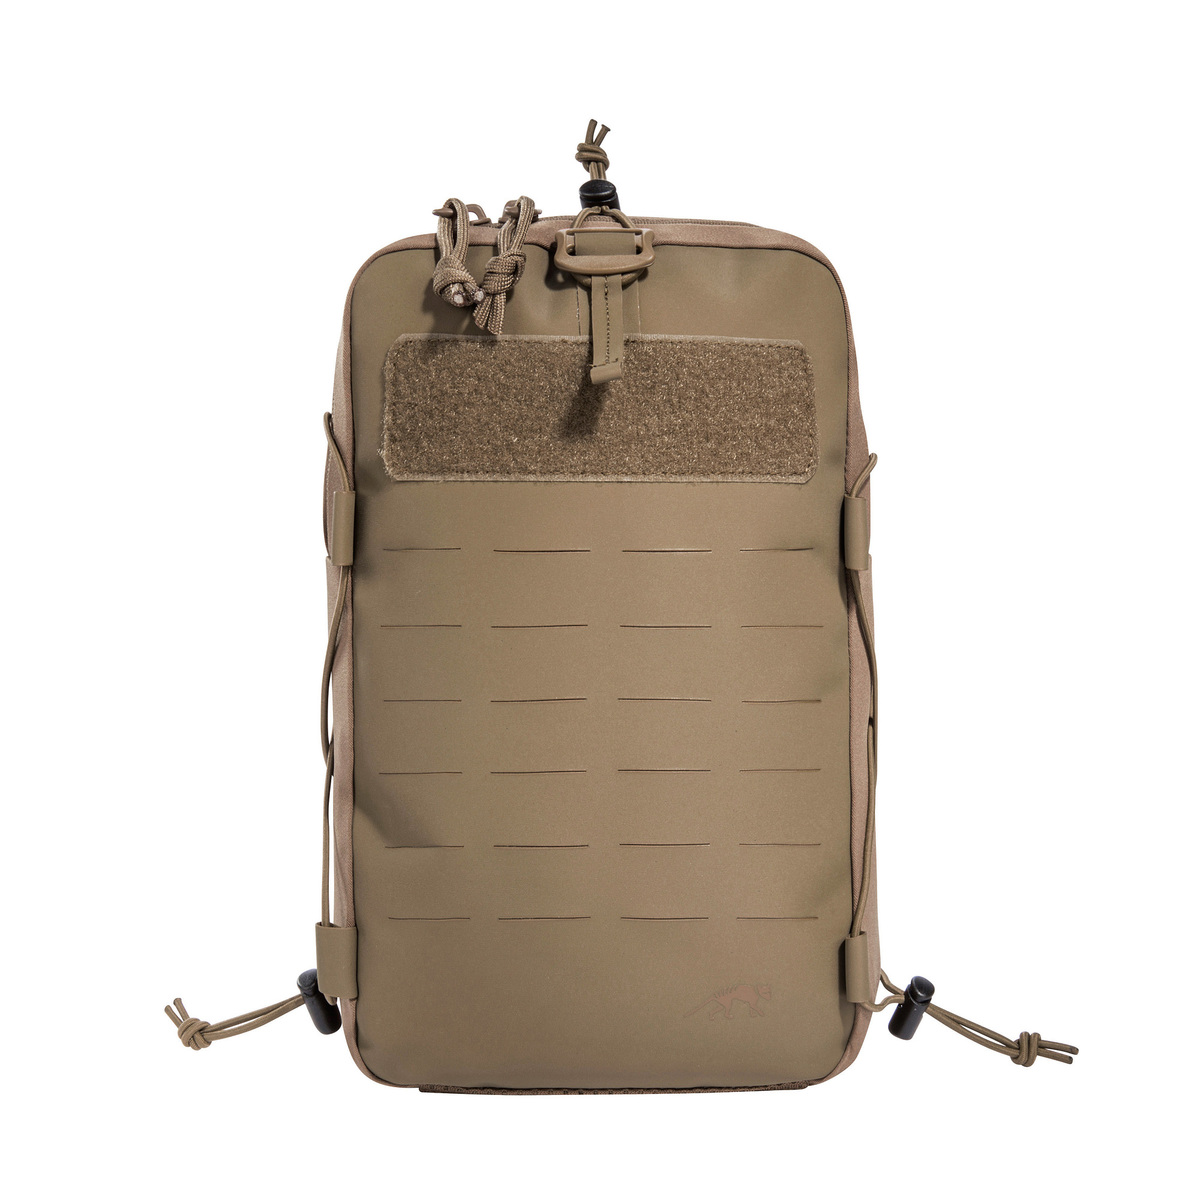 Tac Pouch 18 anfibia